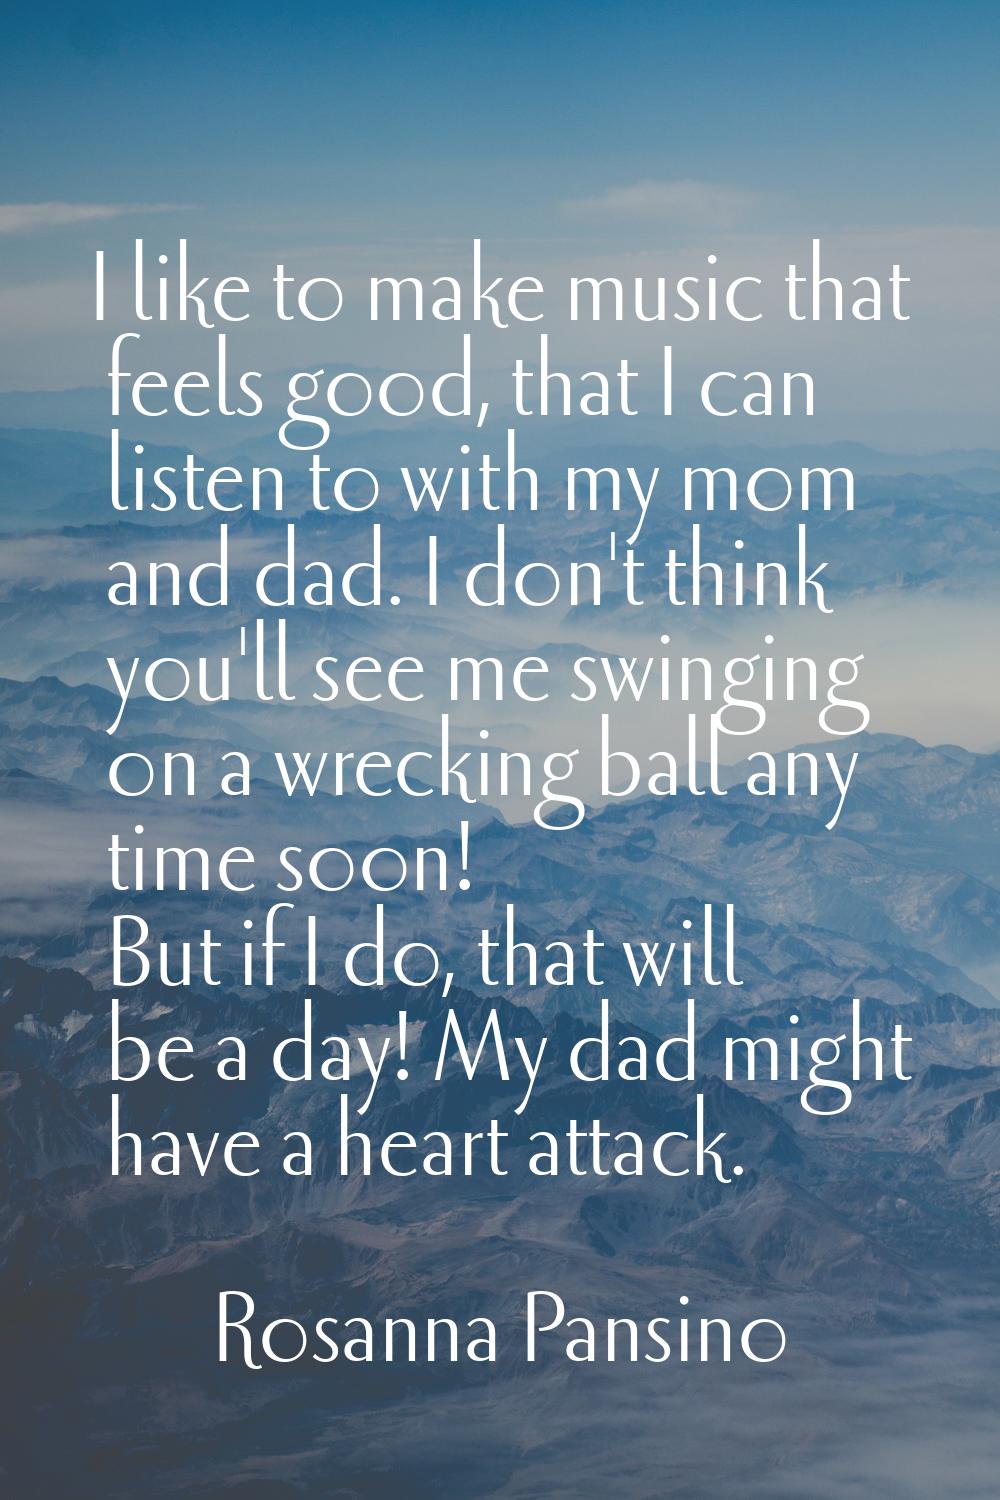 I like to make music that feels good, that I can listen to with my mom and dad. I don't think you'l